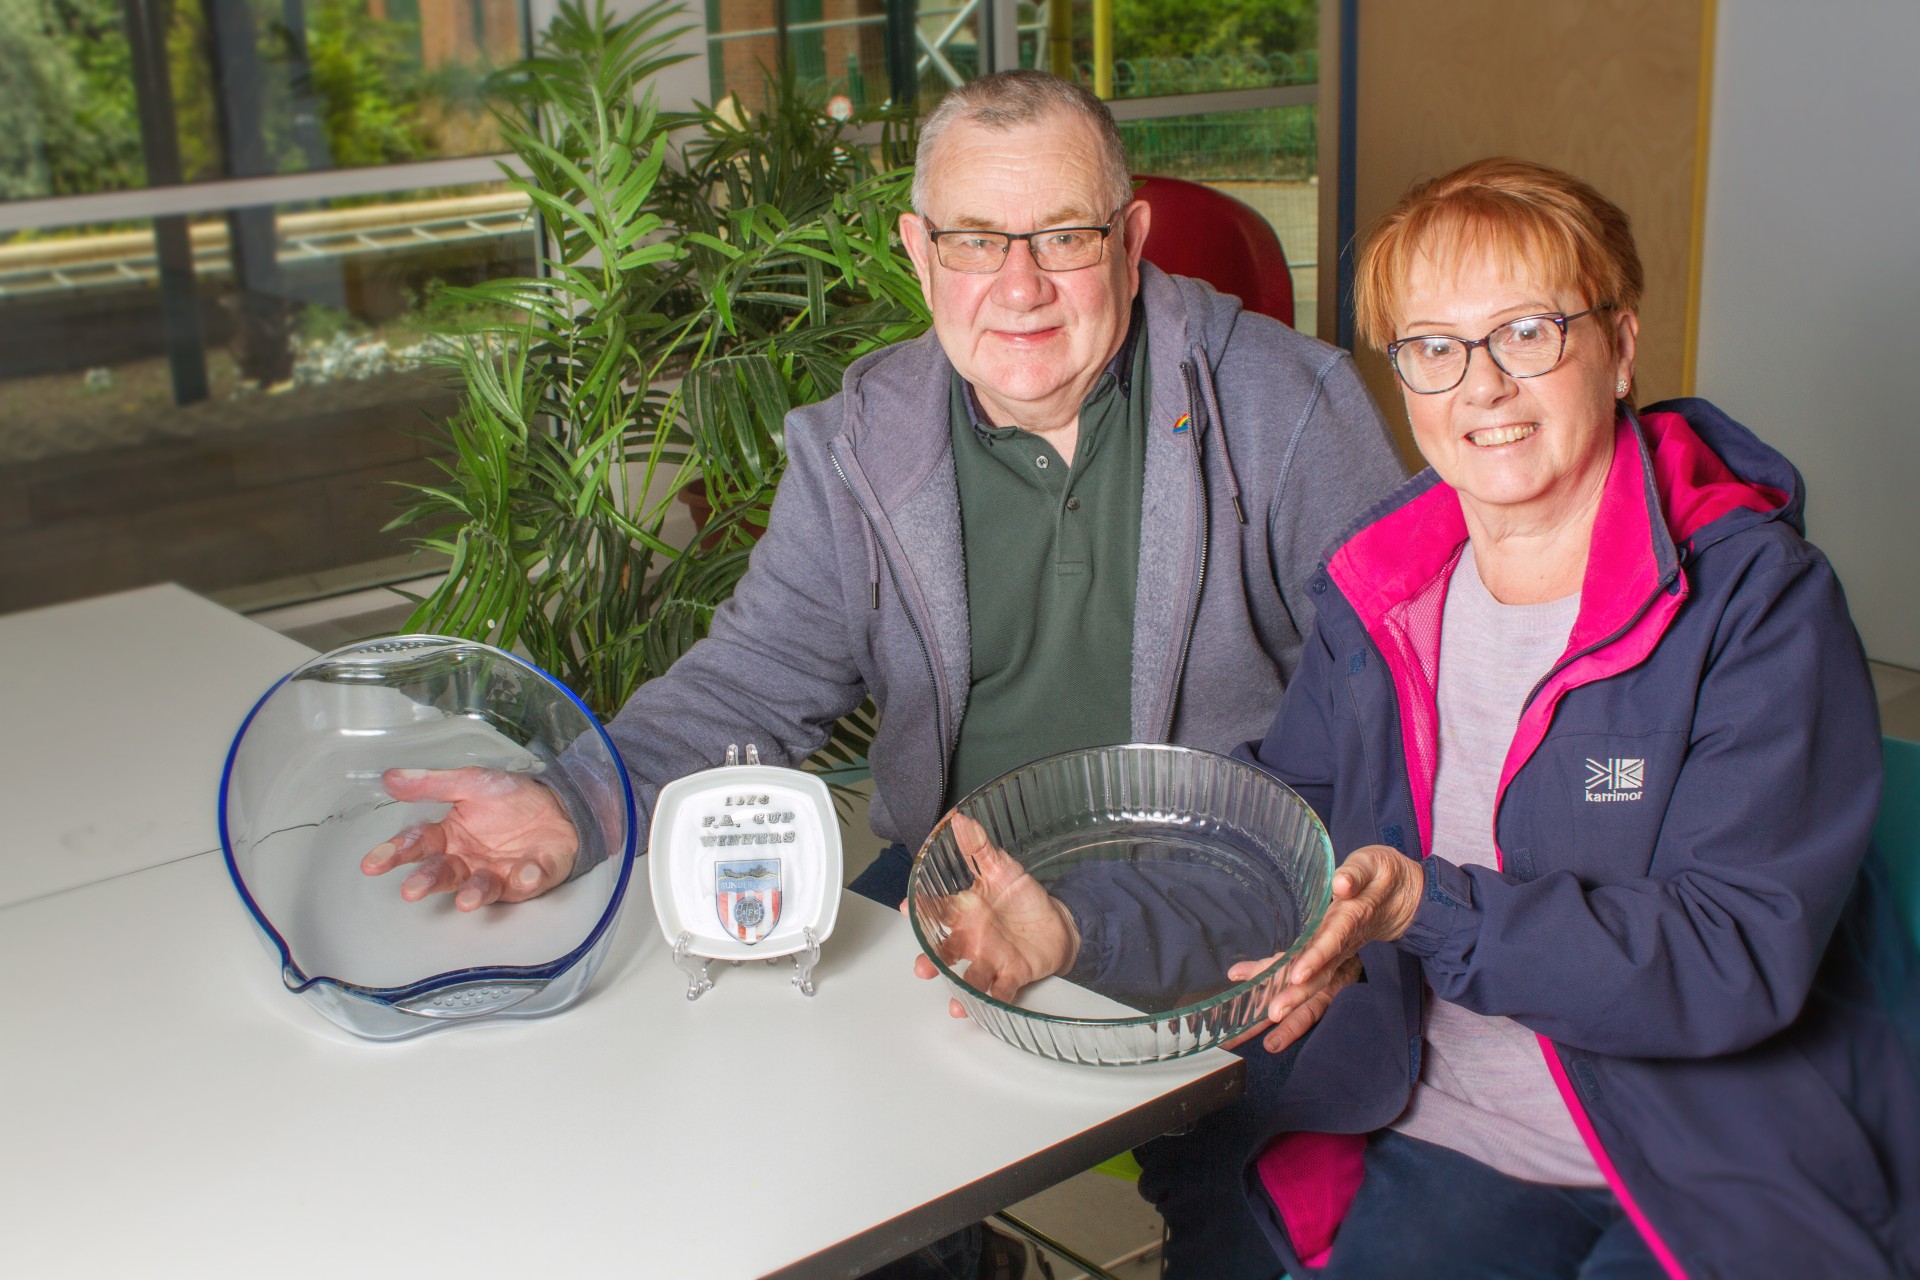 Carole and her husband with ‘Pyrex’ roasting dish, FA cup winners commemorative plate and fluted pie dish Logo